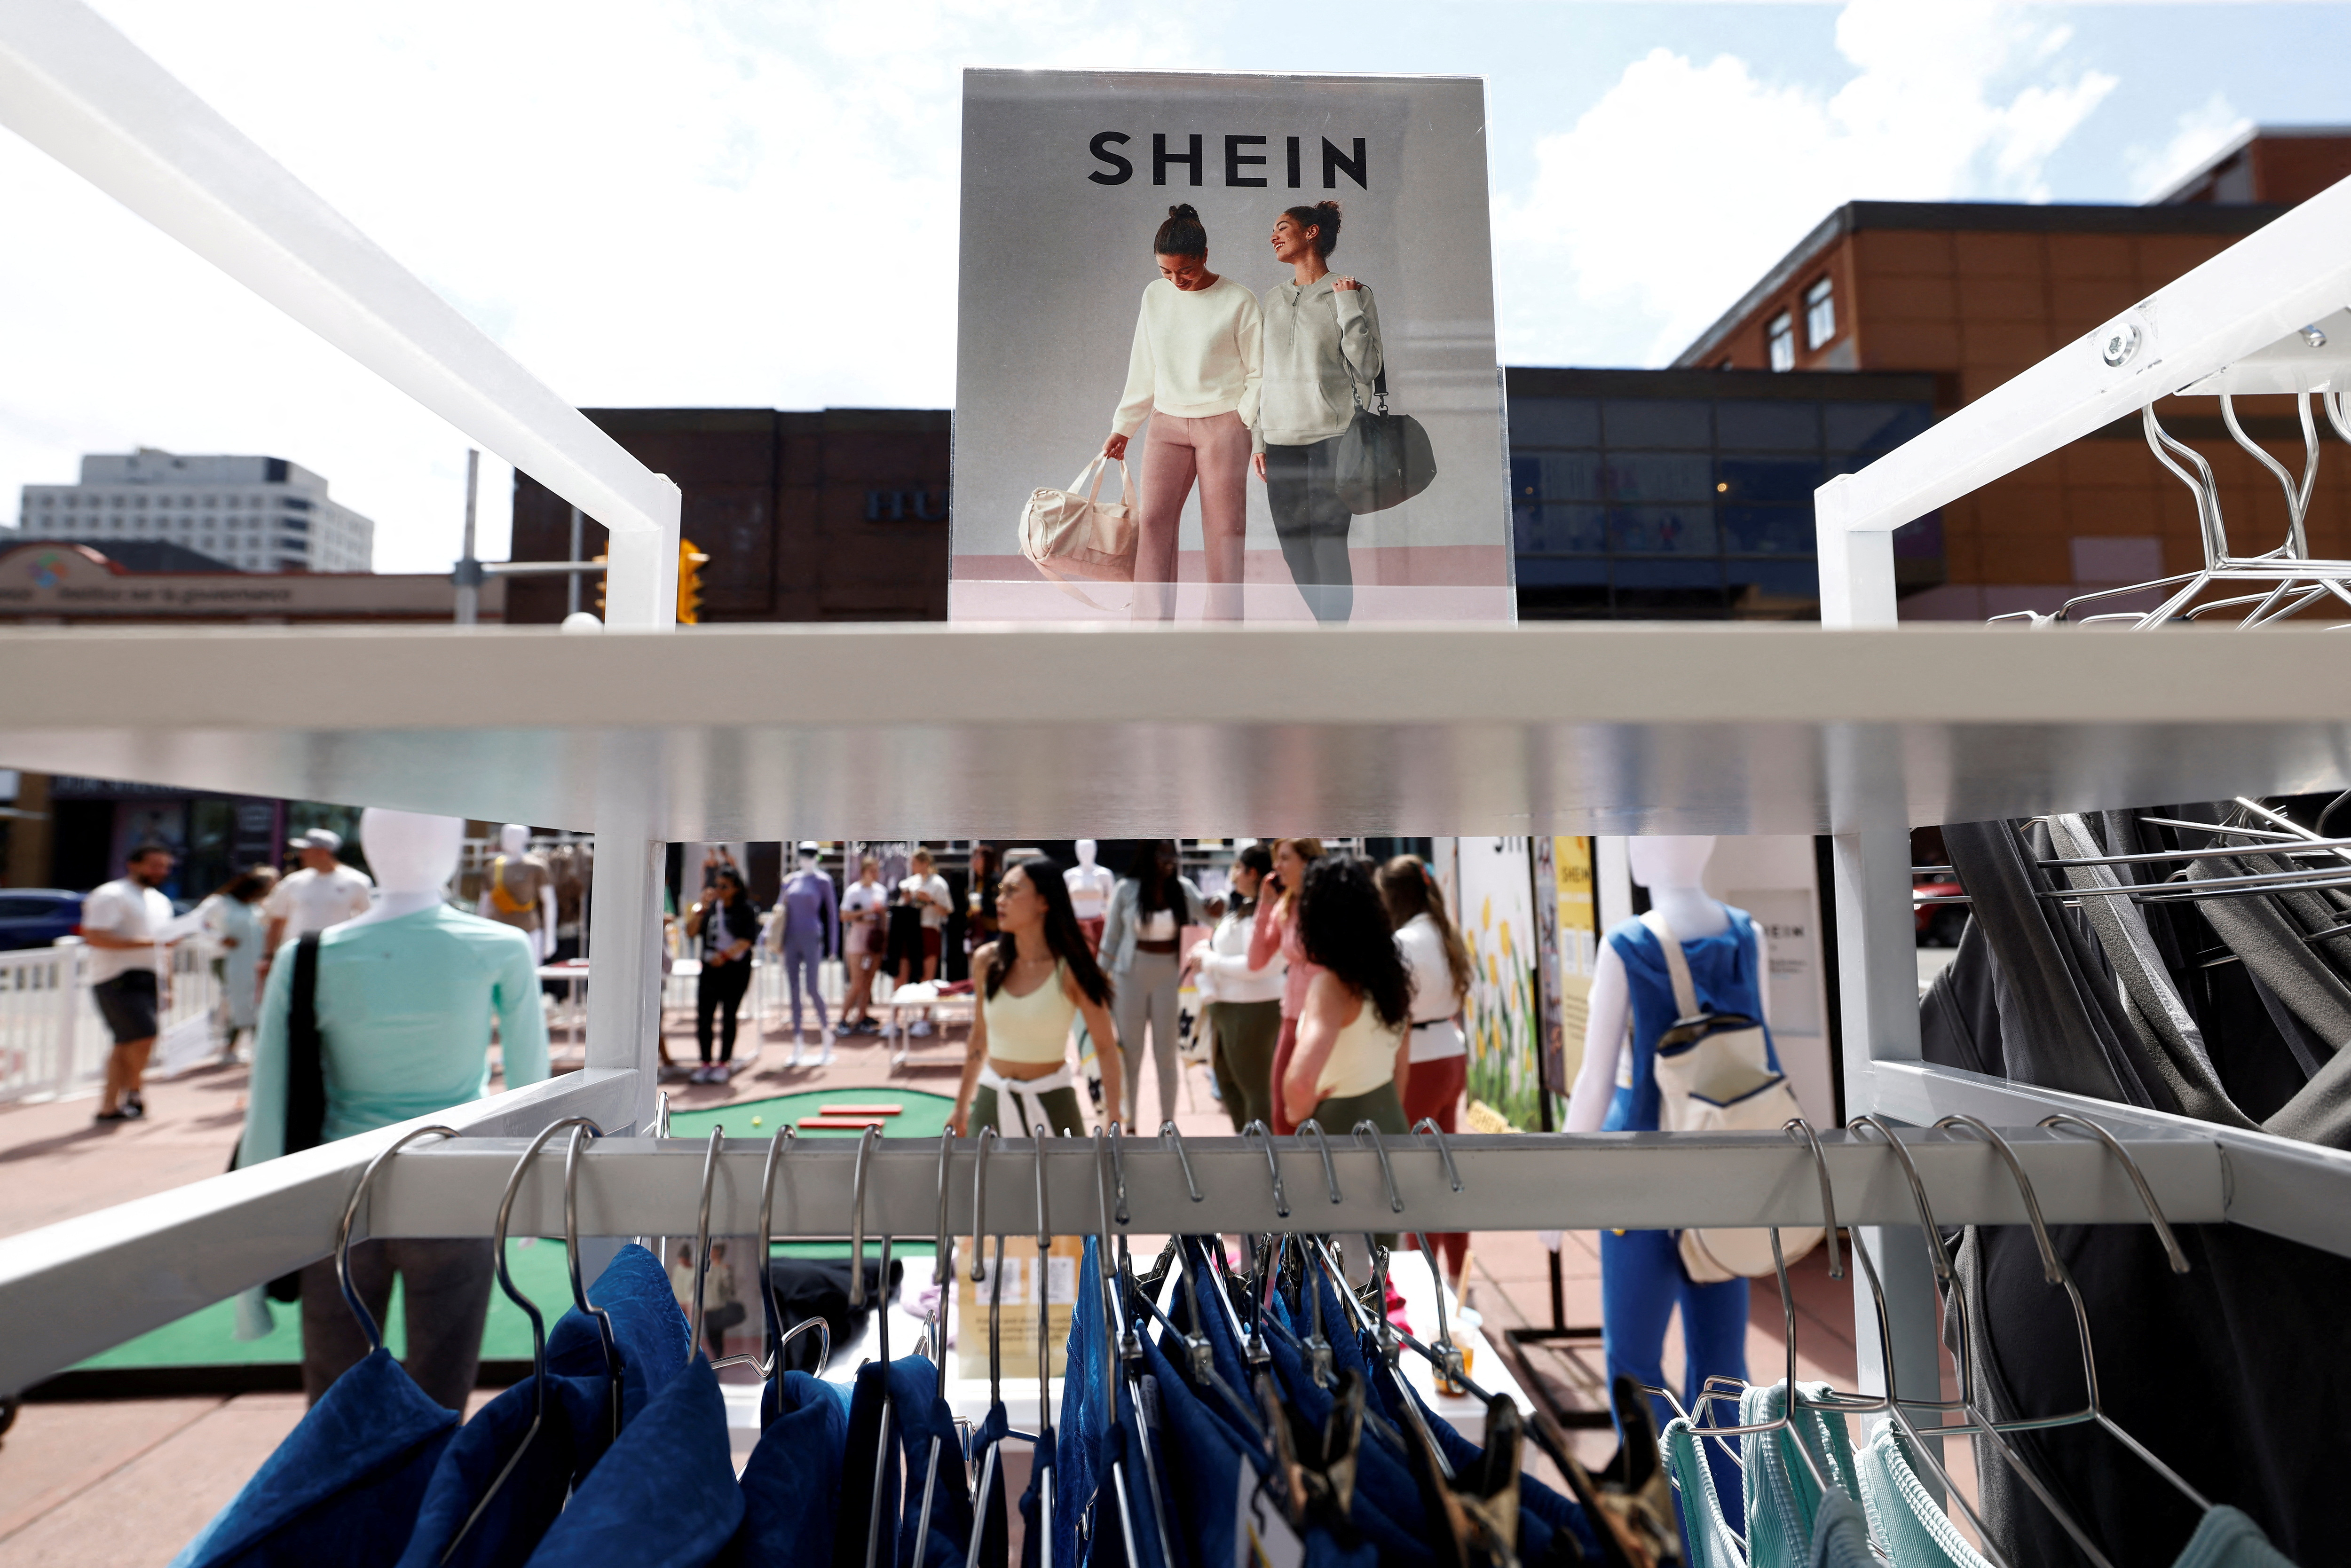 image Shein filed for London listing in early June, sources say